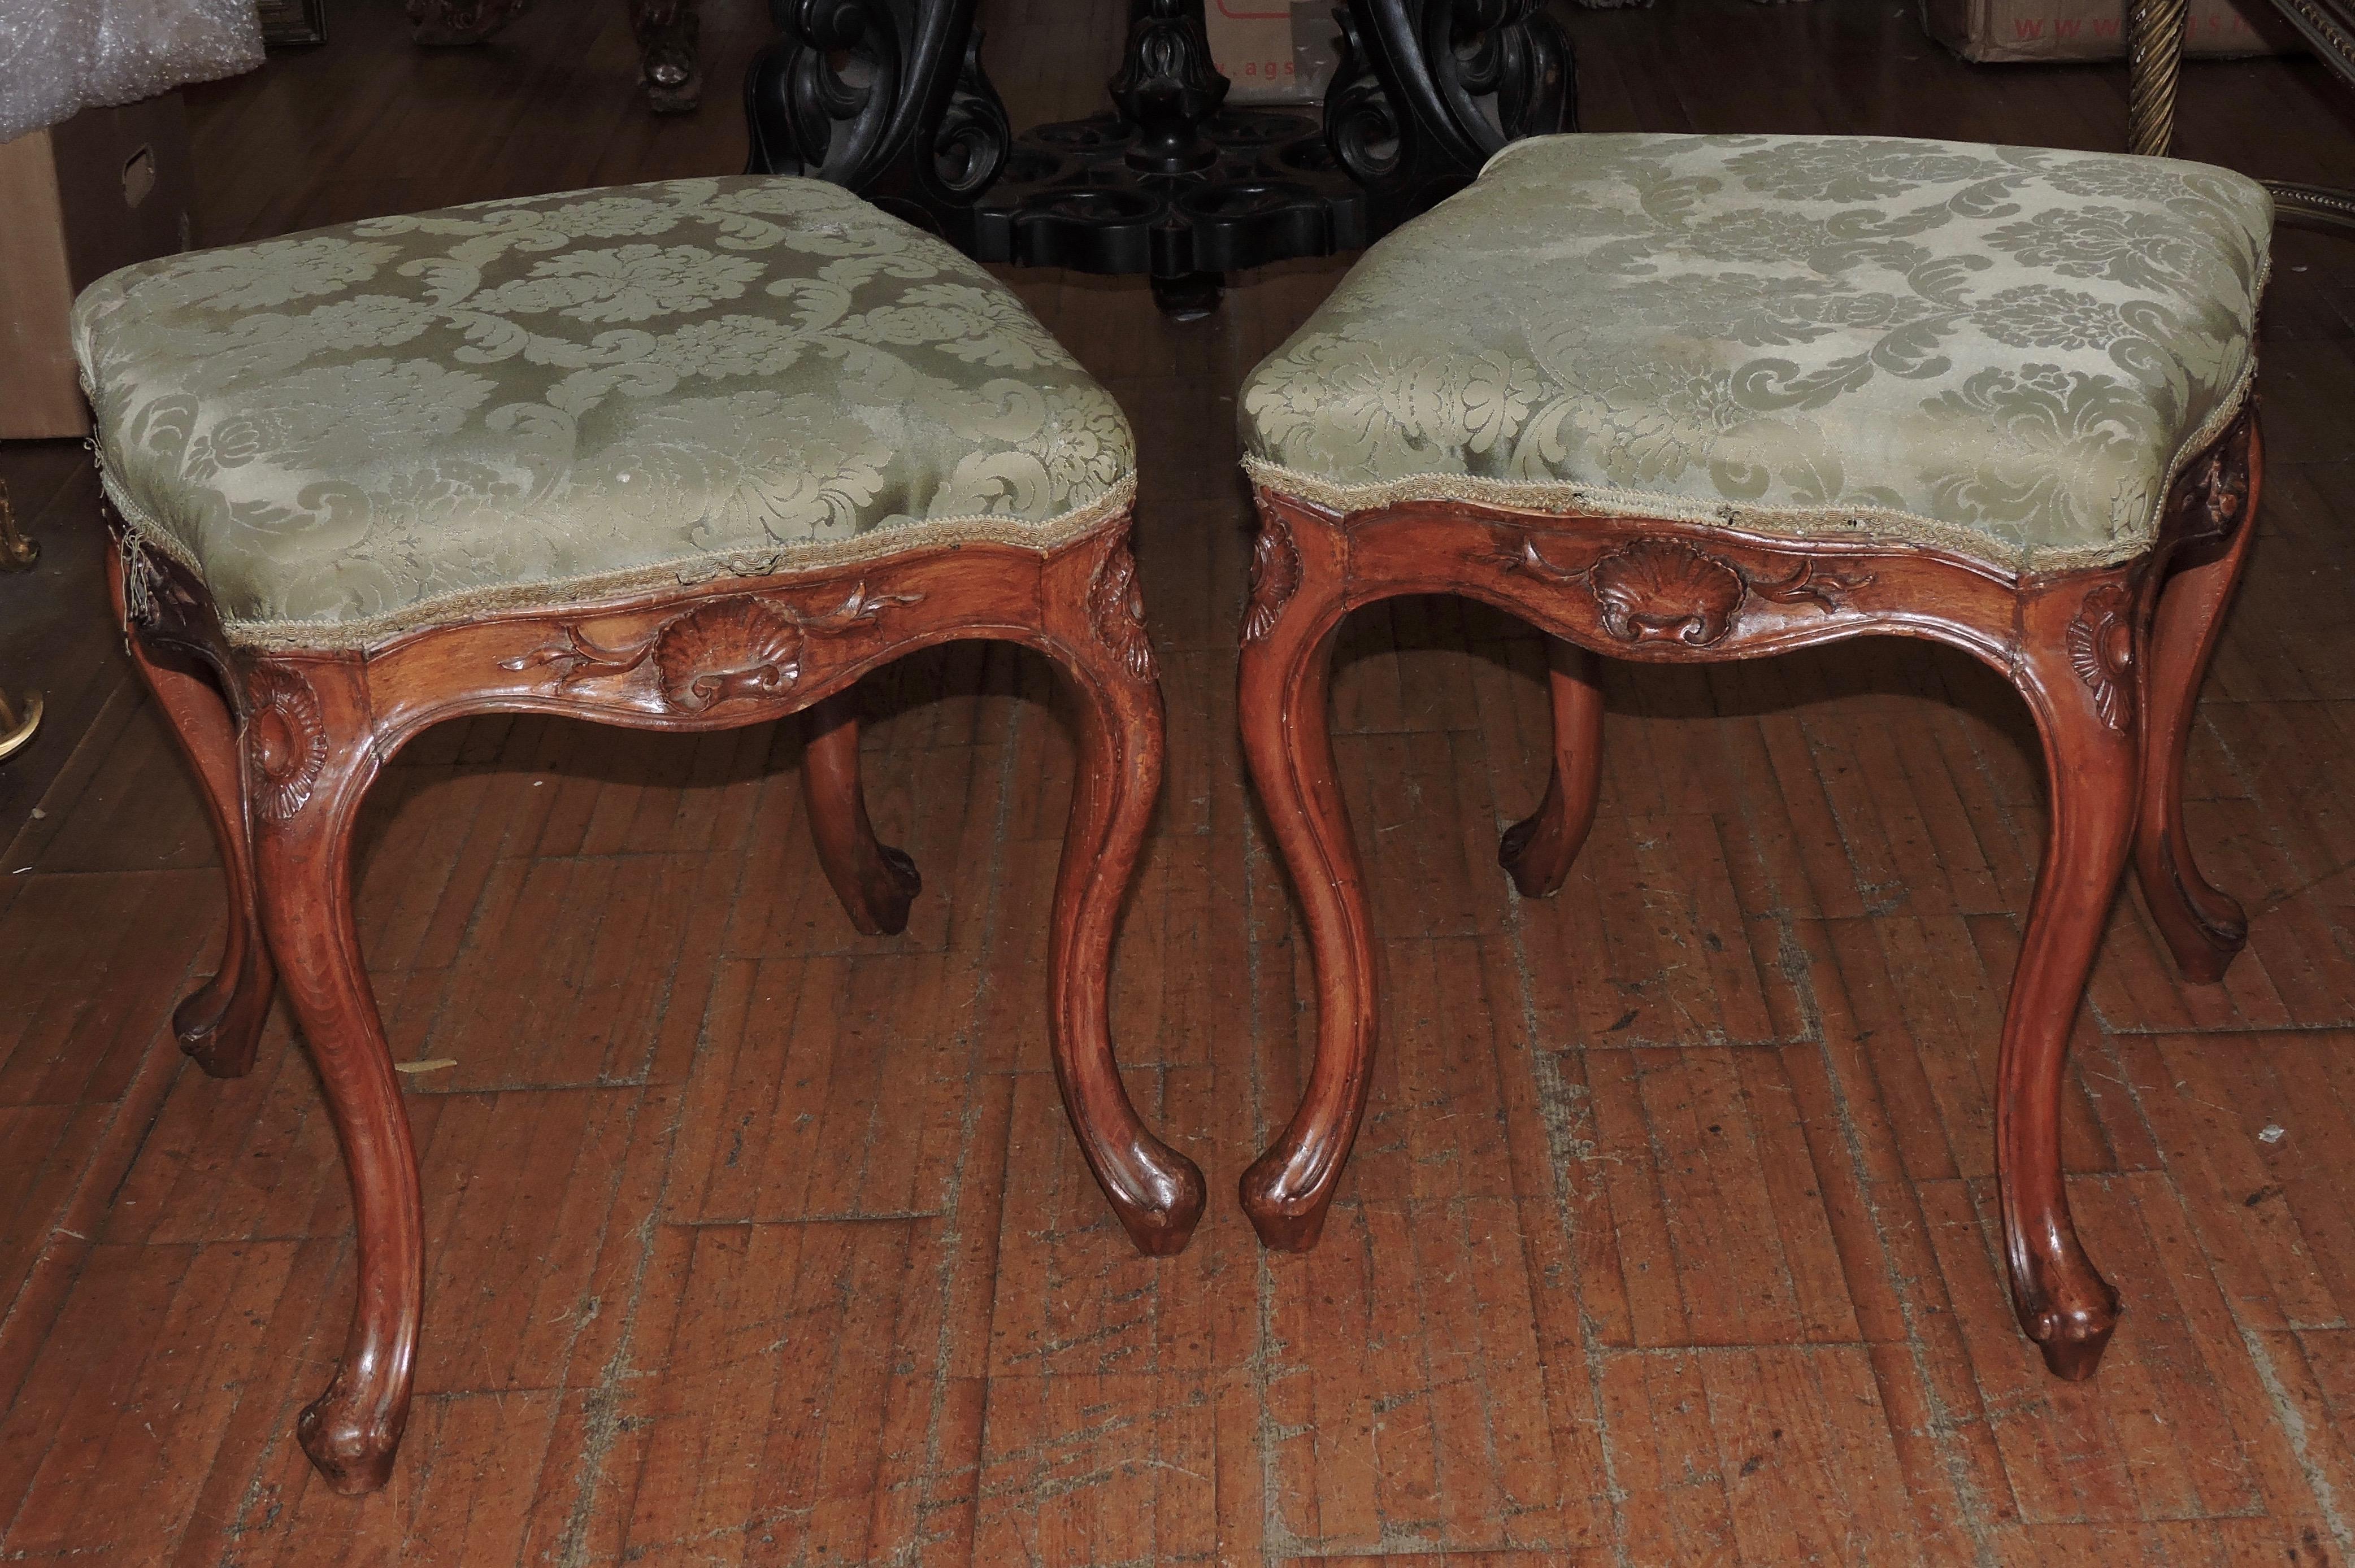 Pair of 18th century Louis XV rectangular stools
Four feet carved with shells, flowers and acanthus leaves,
circa 1750.